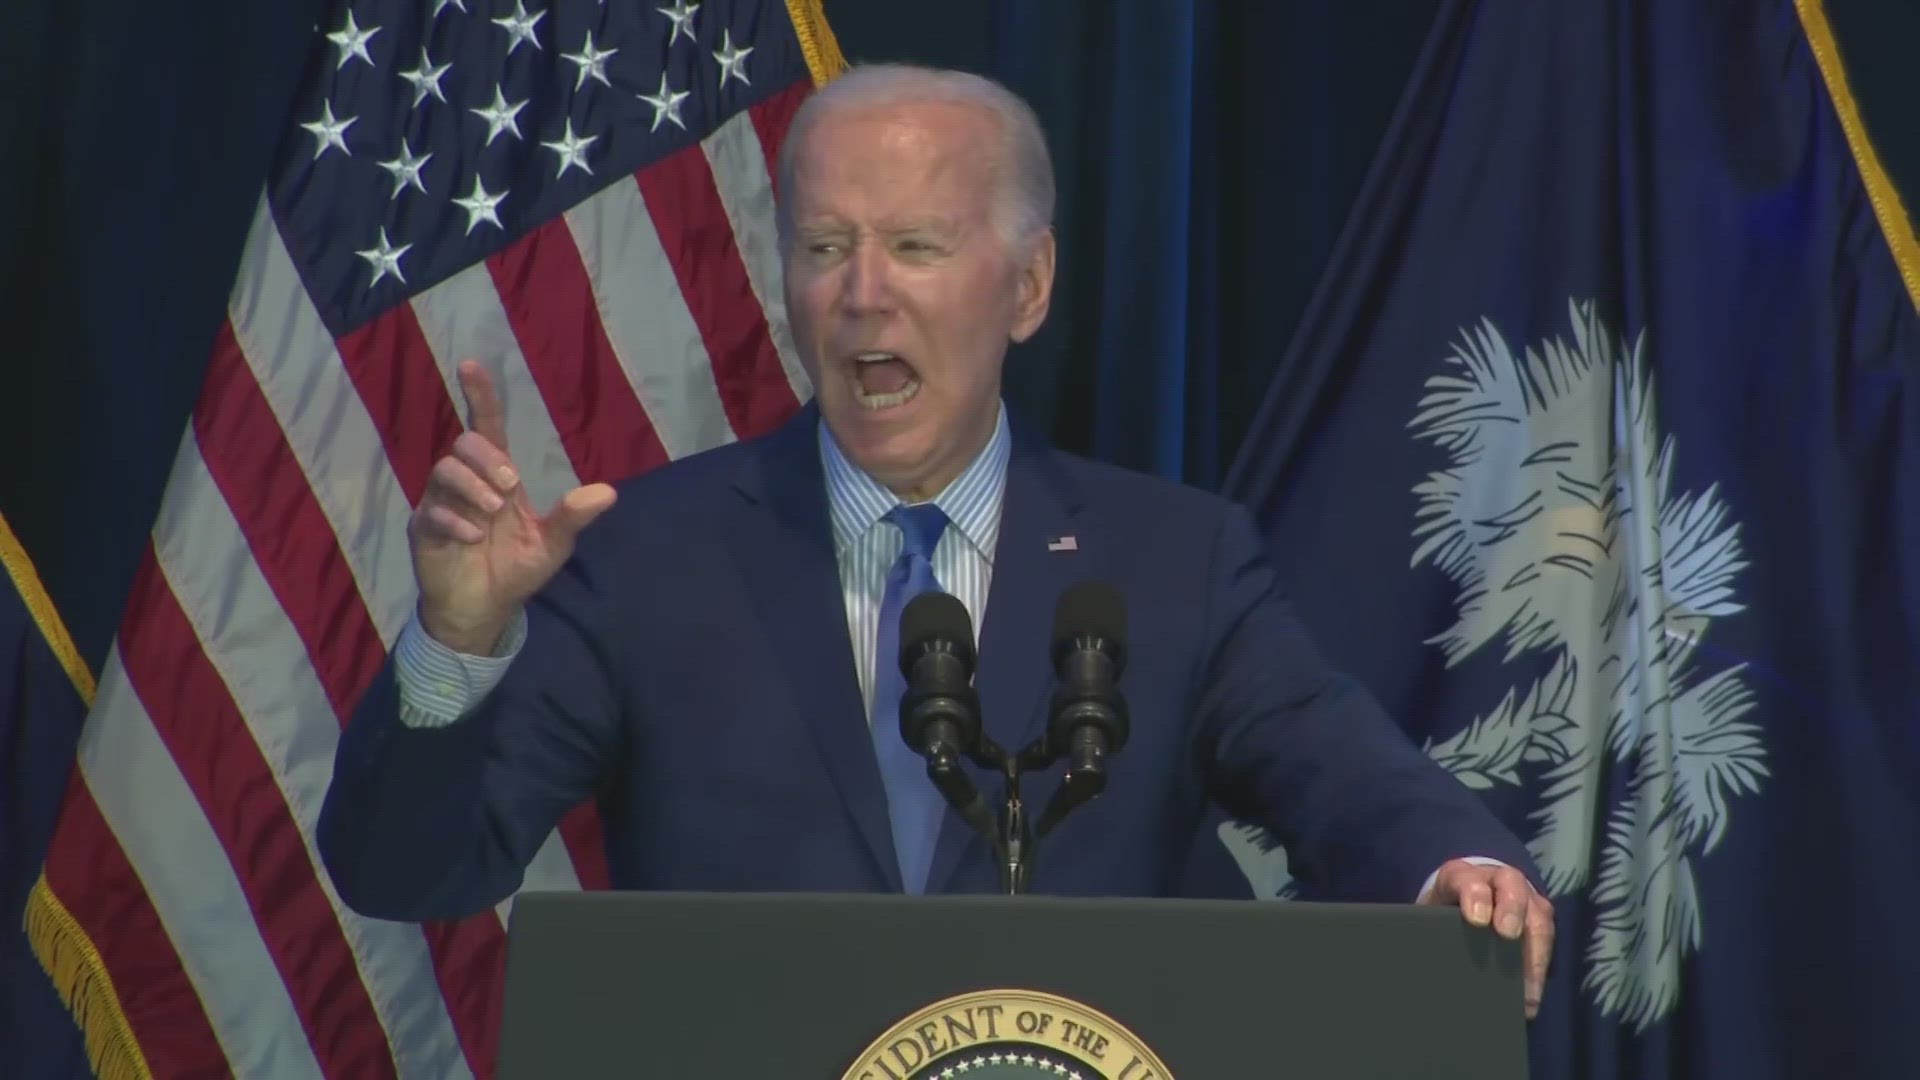 President Joe Biden took aim at his rival, former President Donald Trump, during a speech in Columbia, SC on January 27, 2024.